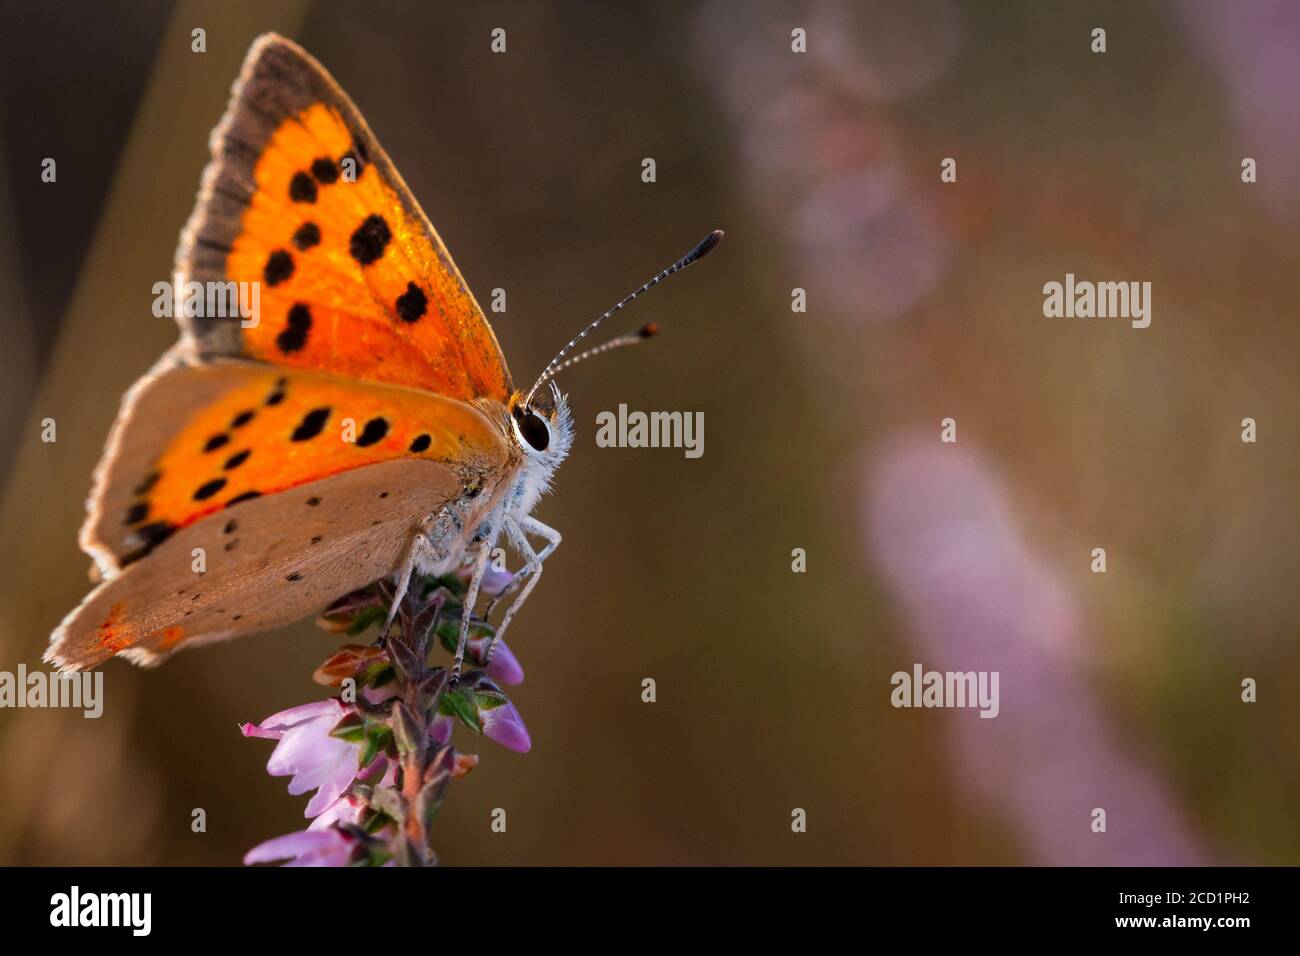 A small copper butterfly (Lycaena phlaeas) sitting on the heather flowers stretches its wings before flying in through the Suffolk heathland Stock Photo